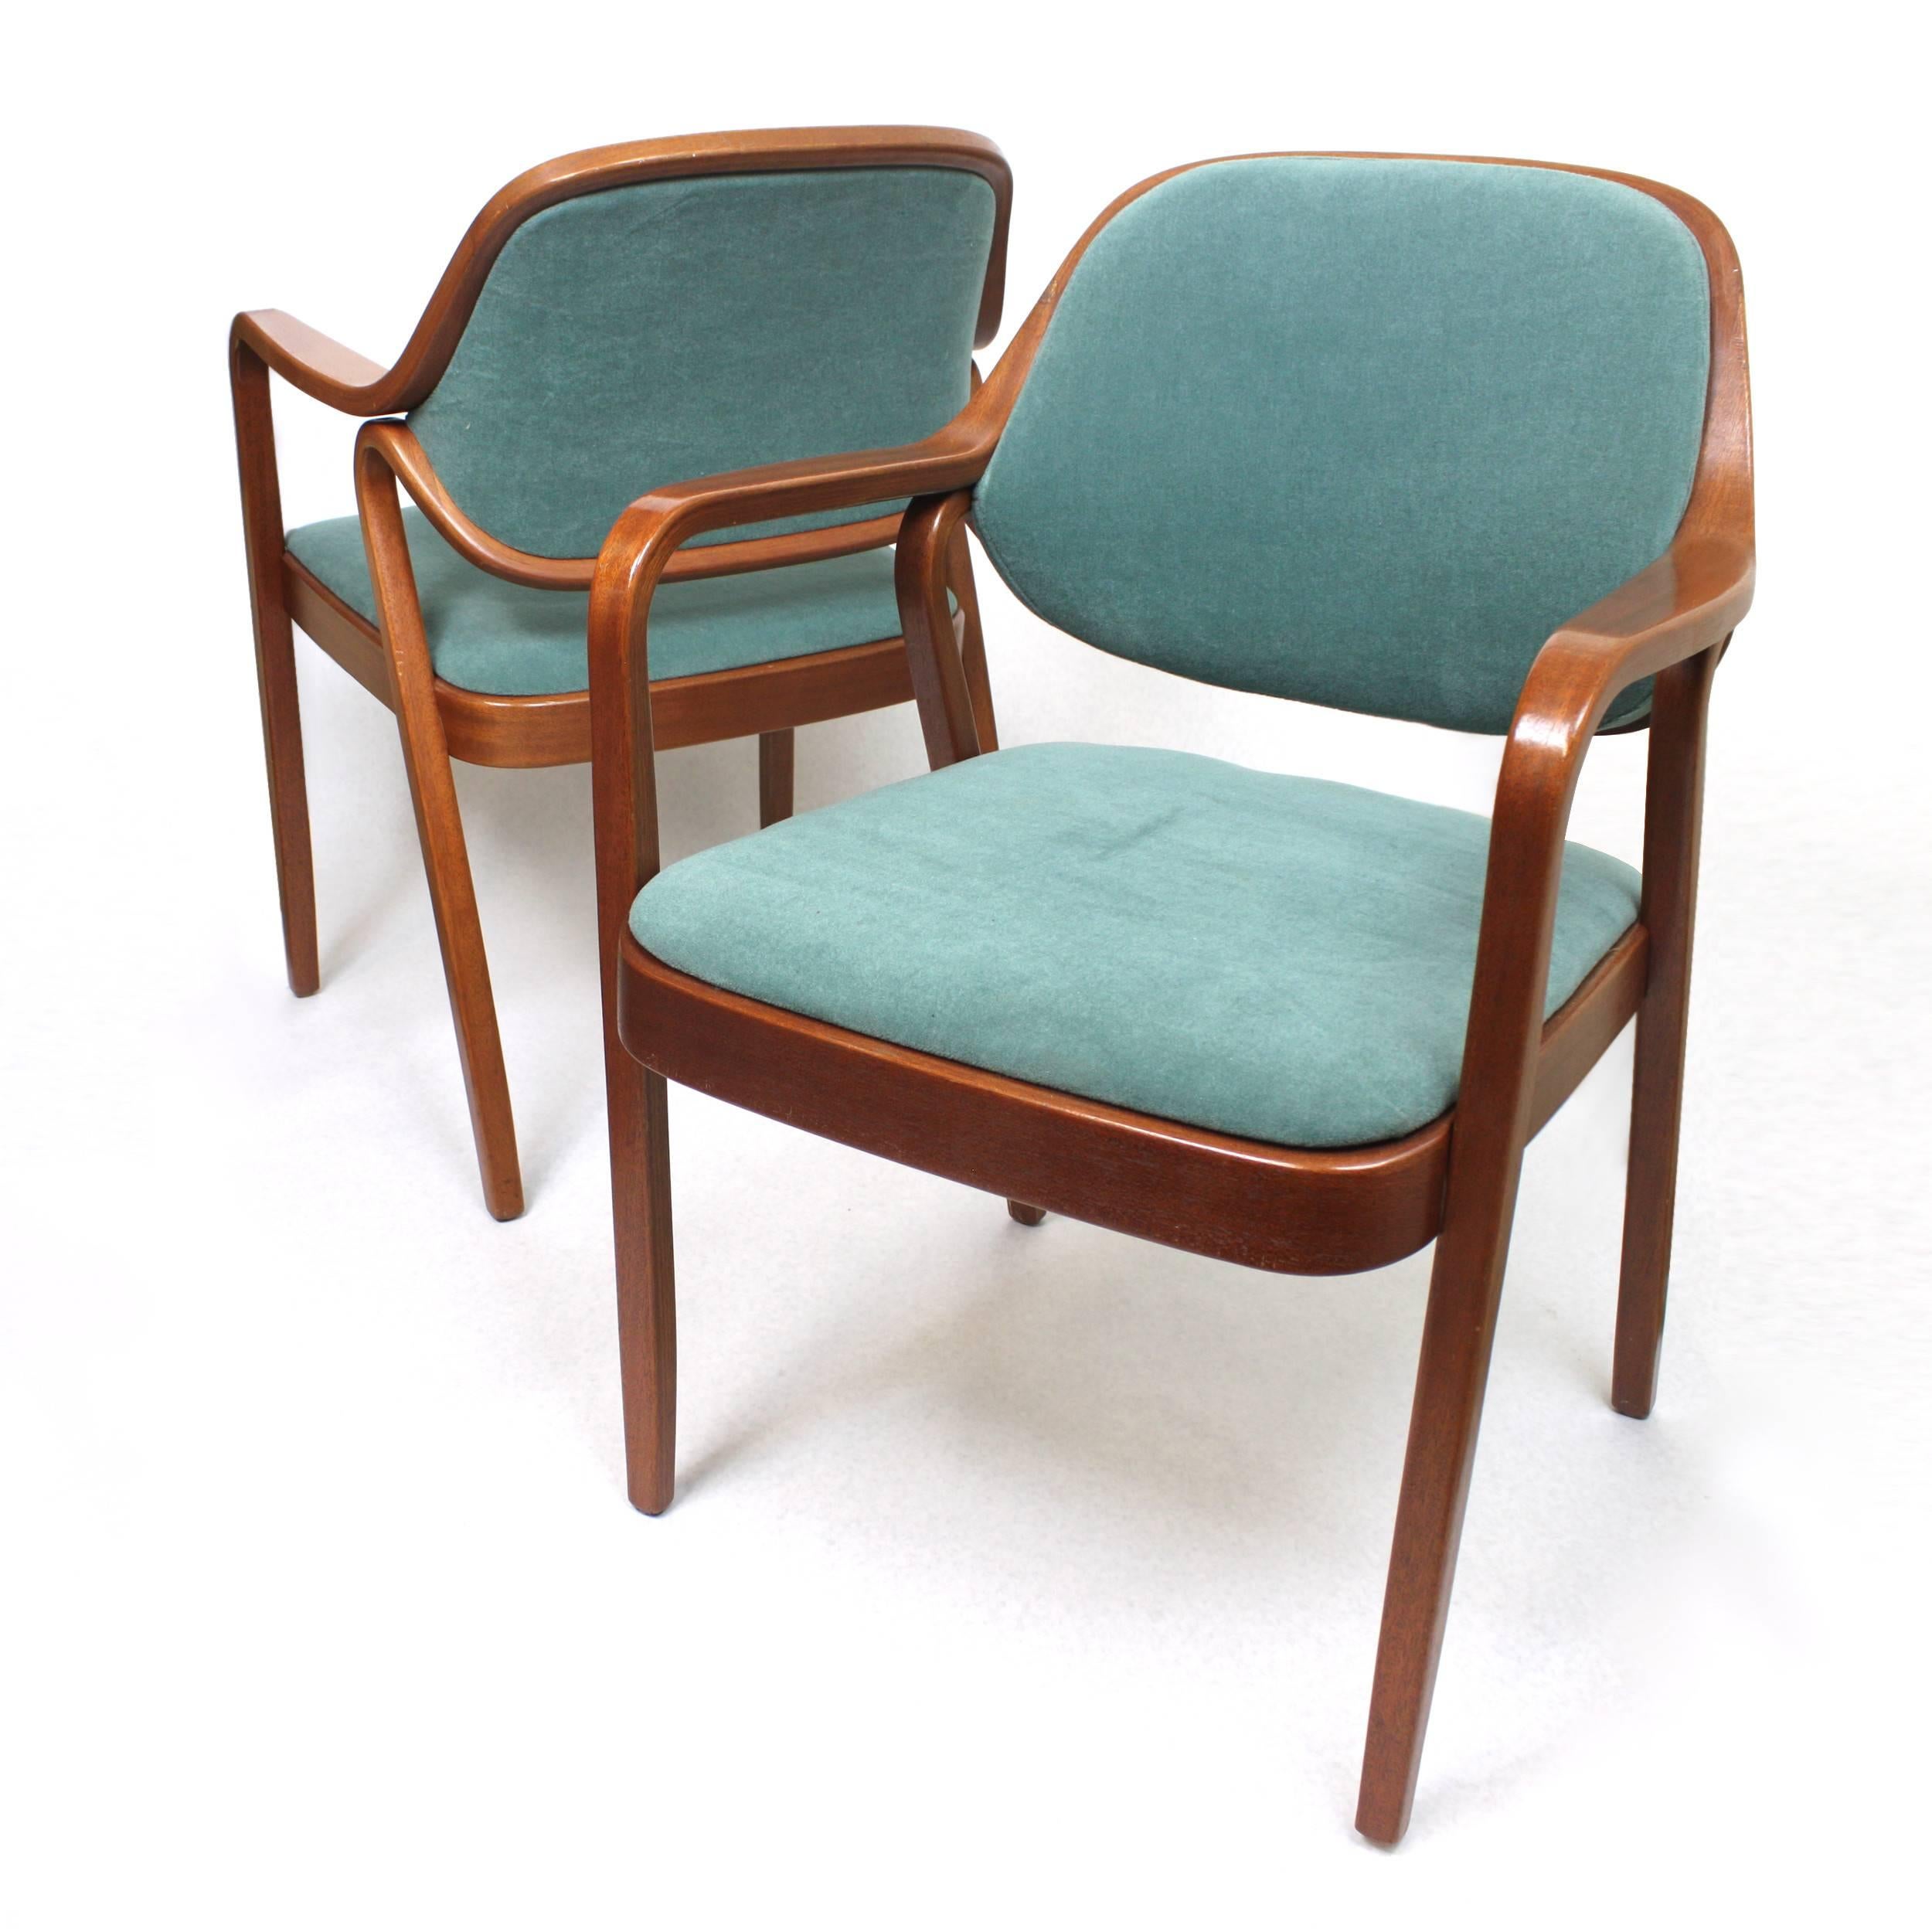 This curvaceous pair of bent-mahogany armchairs were designed by Don Pettit and manufactured by Knoll. Chairs feature new teal velour upholstery that compliments the red mahogany frames beautifully and really makes these babies pop! Their versatile